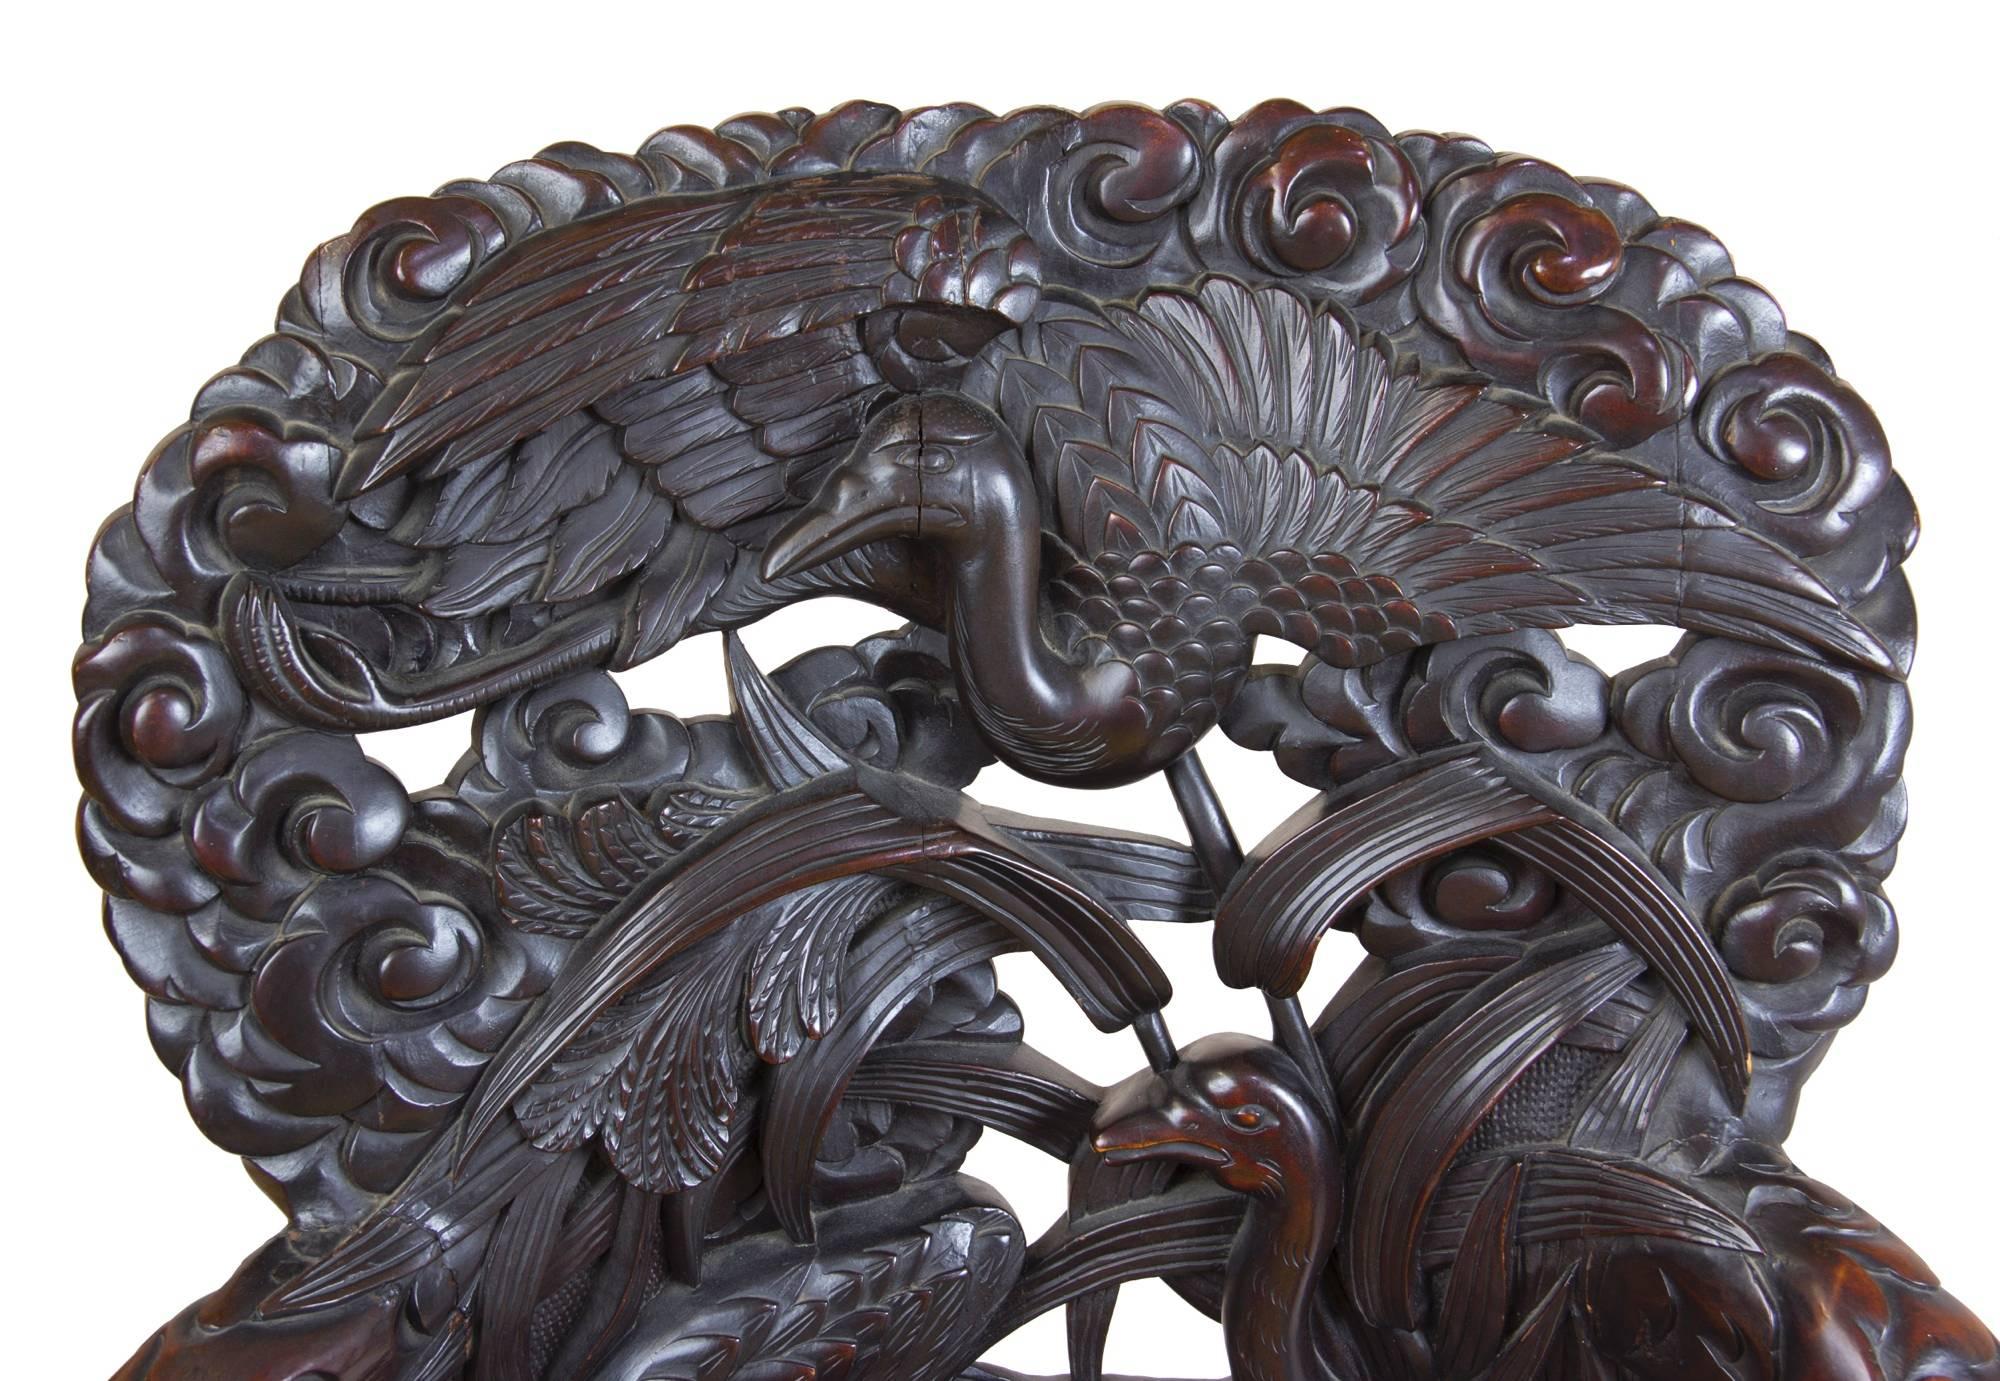 Exuberant Wood Armchair with Bird Motif and Floral Carving, Late 19th Century In Excellent Condition For Sale In Providence, RI